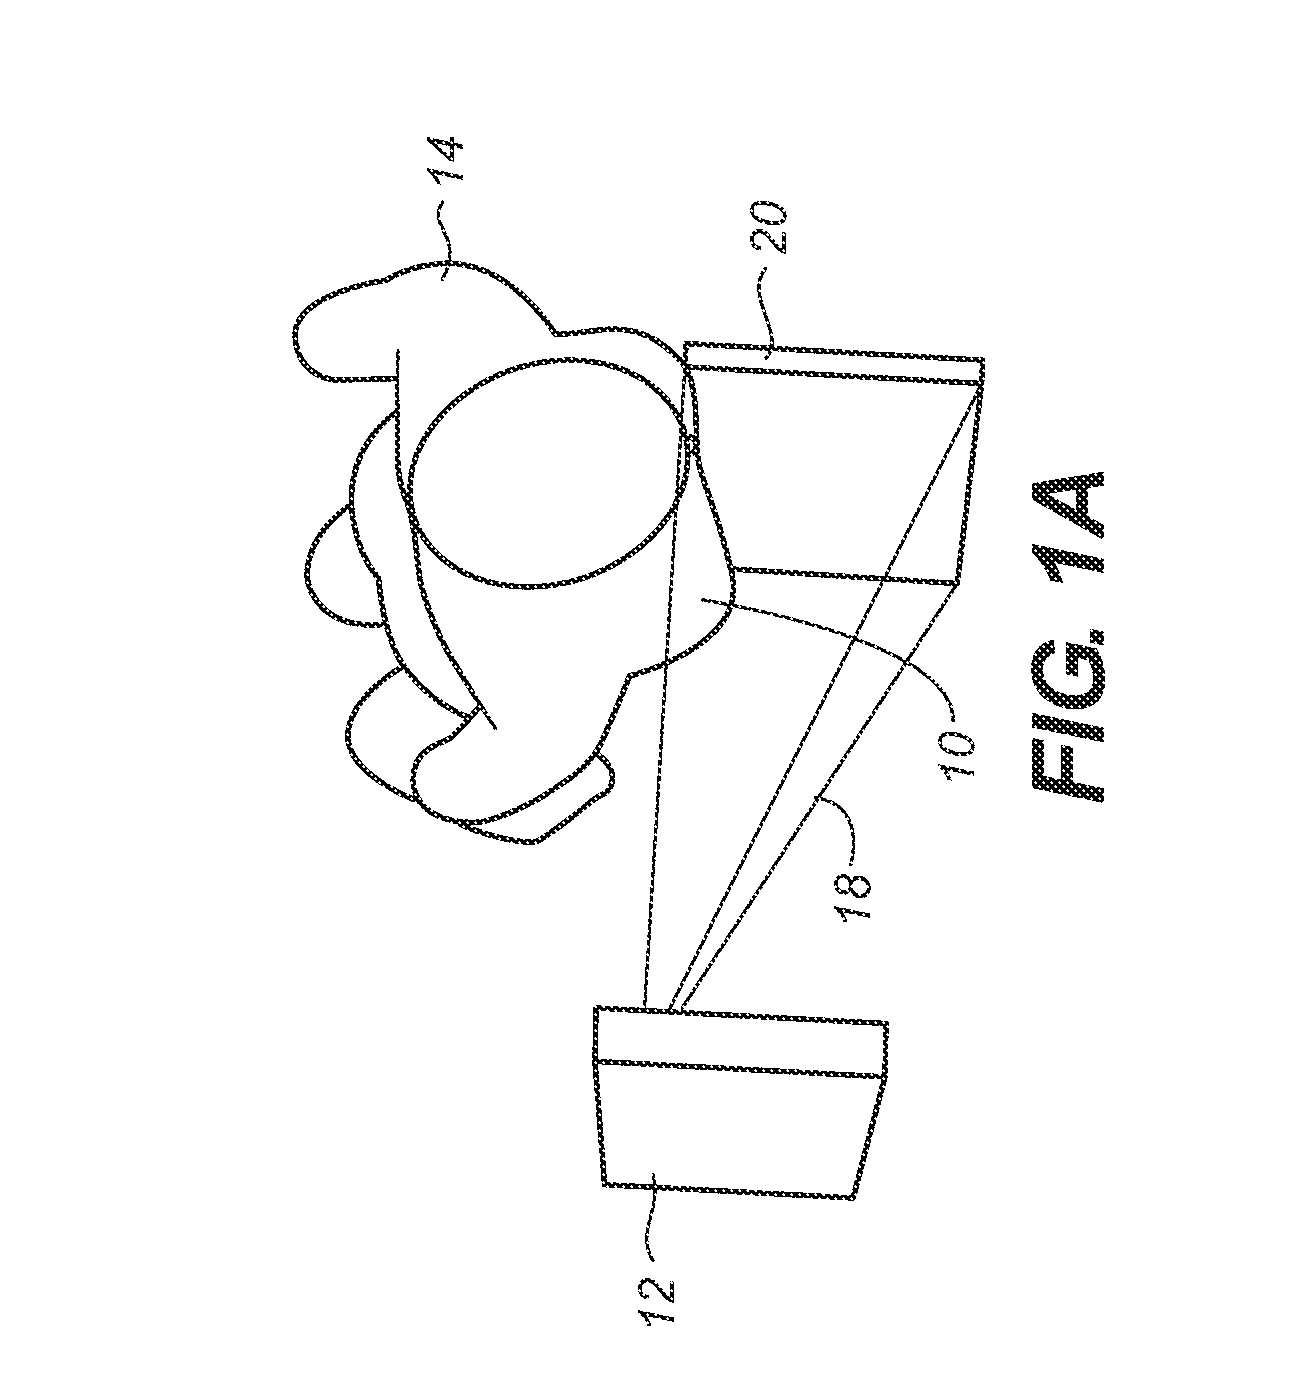 Apparatus and method for breast imaging